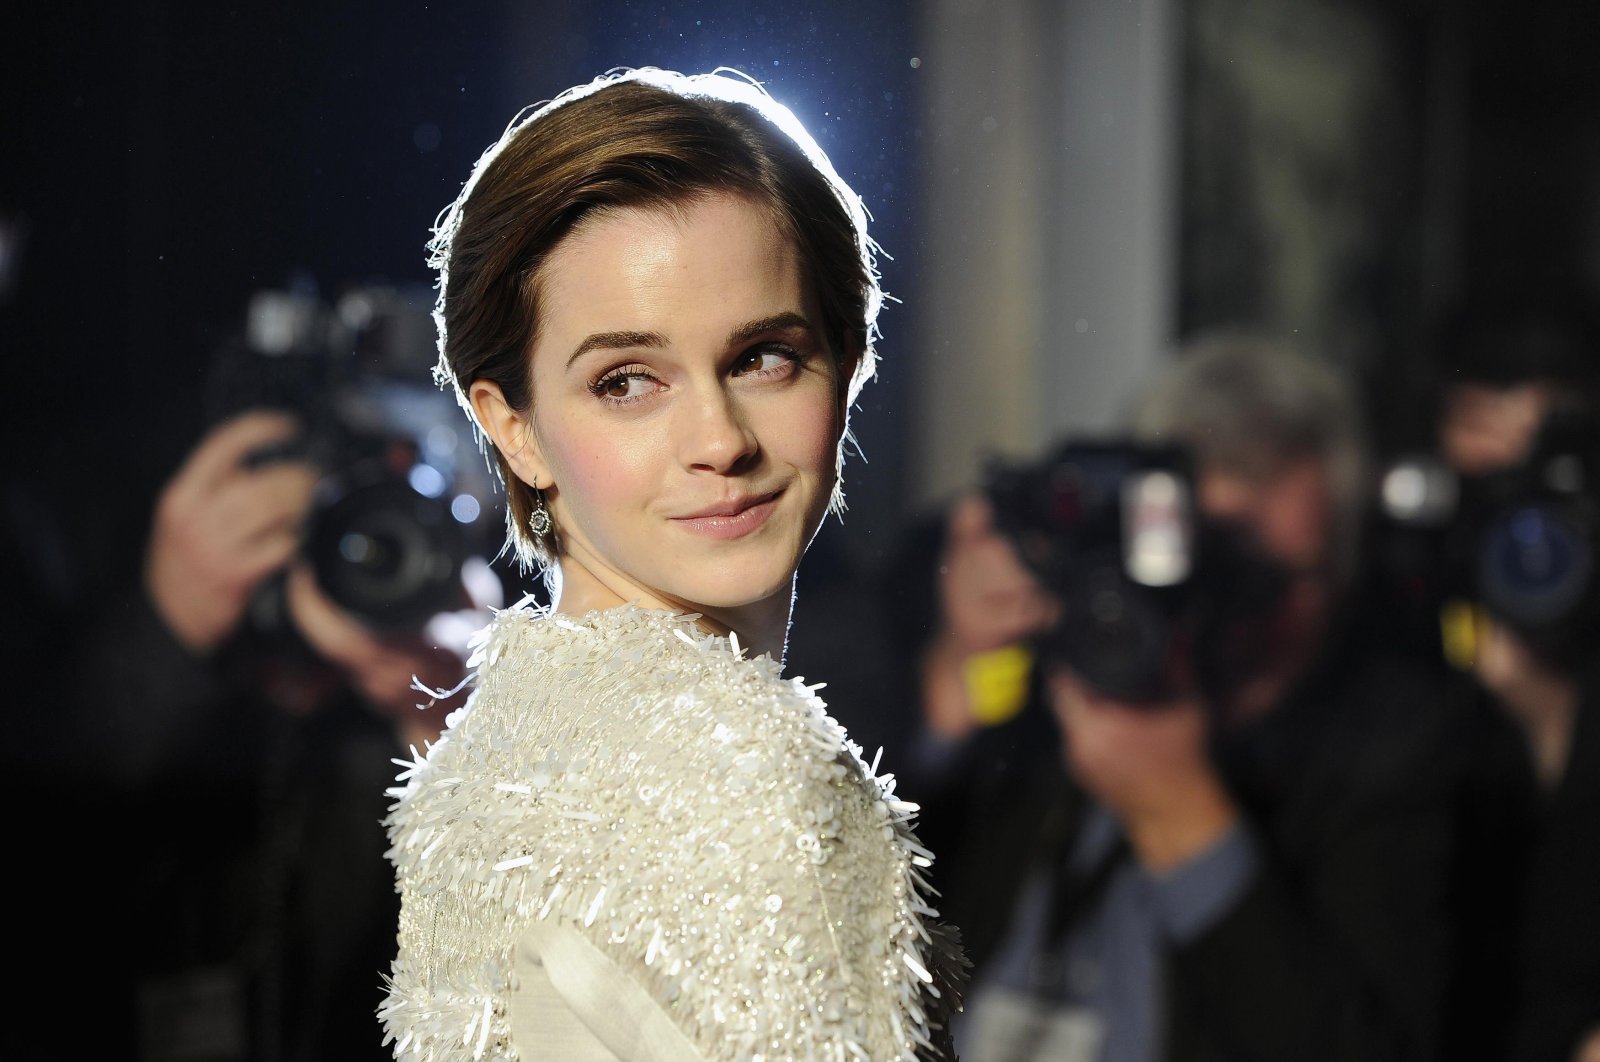 Cast member Emma Watson arrives for the European premiere of "My Week With Marilyn" in London, England, Nov. 20, 2011. (Reuters Photo)